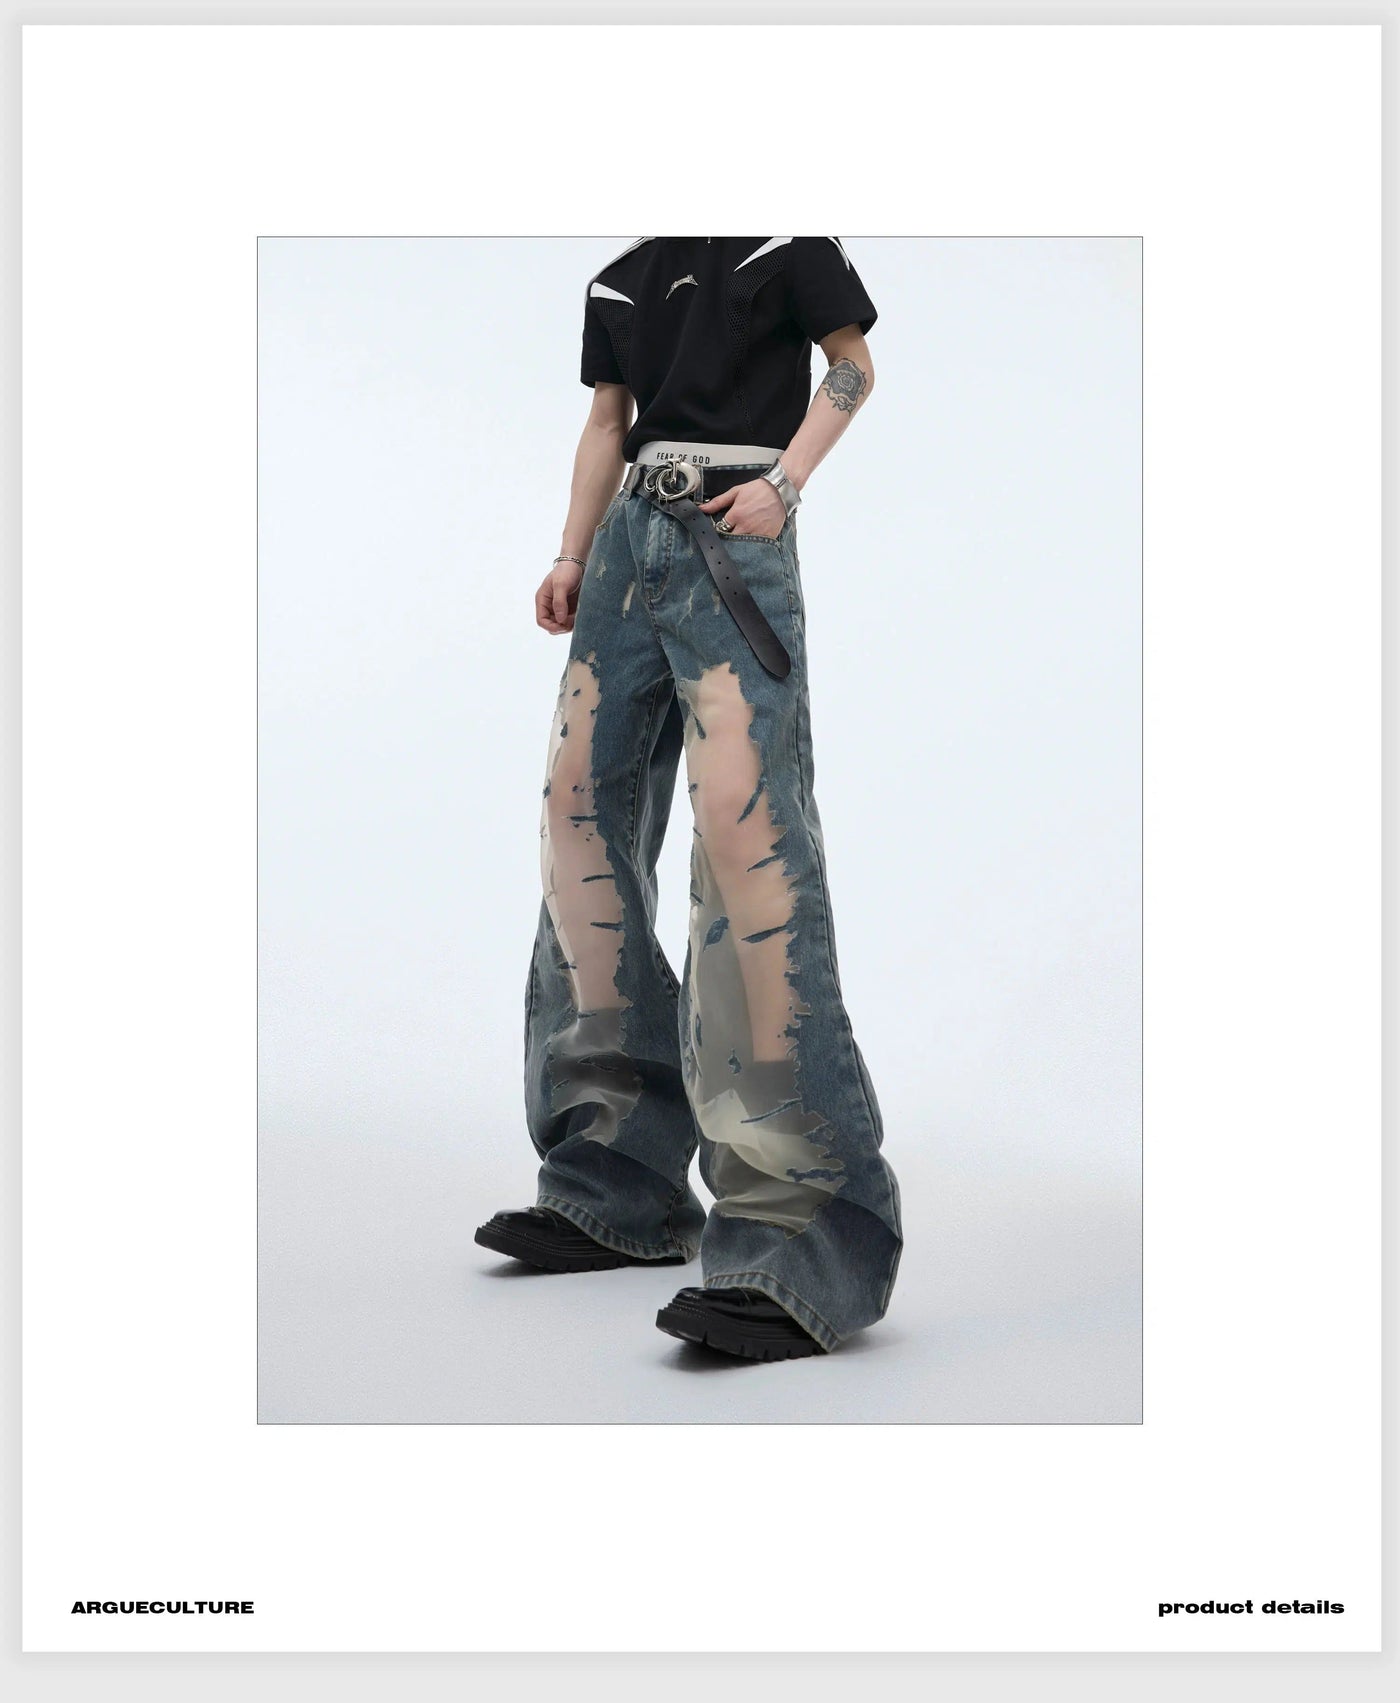 See Through Area Jeans Korean Street Fashion Jeans By Argue Culture Shop Online at OH Vault